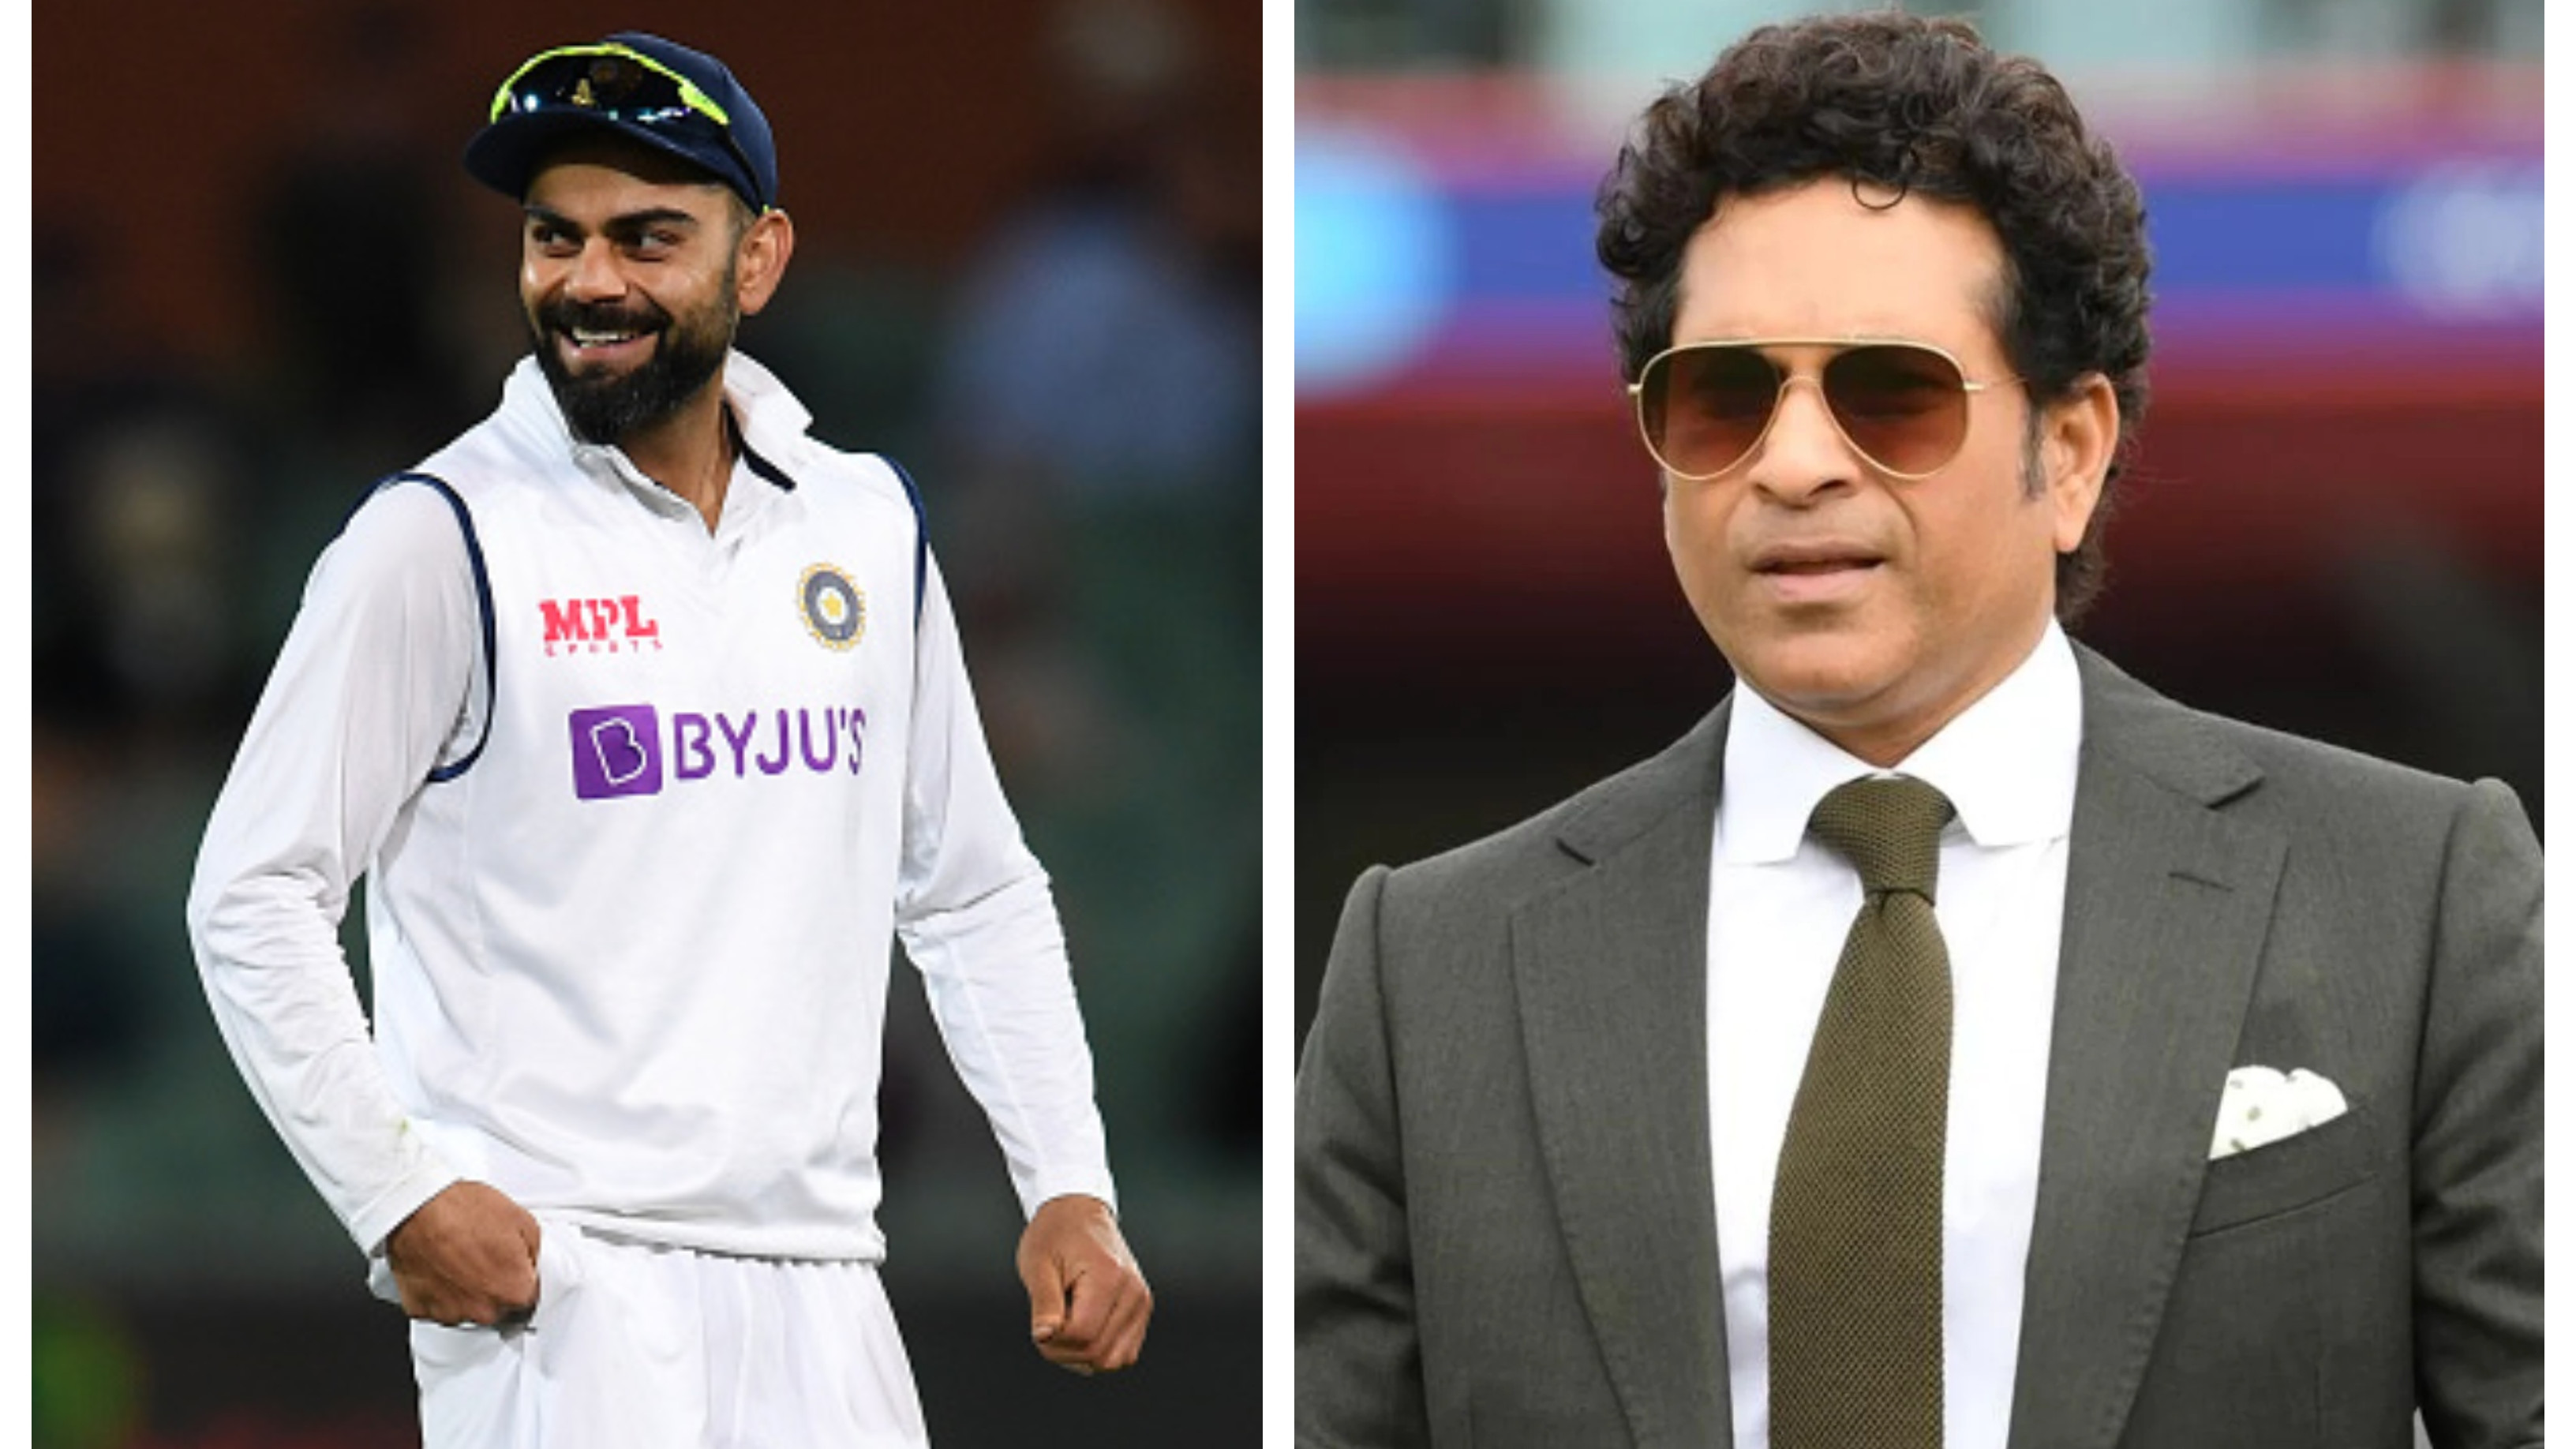 IND v SL 2022: ‘Being able to motivate whole generation’, Tendulkar on Kohli’s real success ahead of his 100th Test